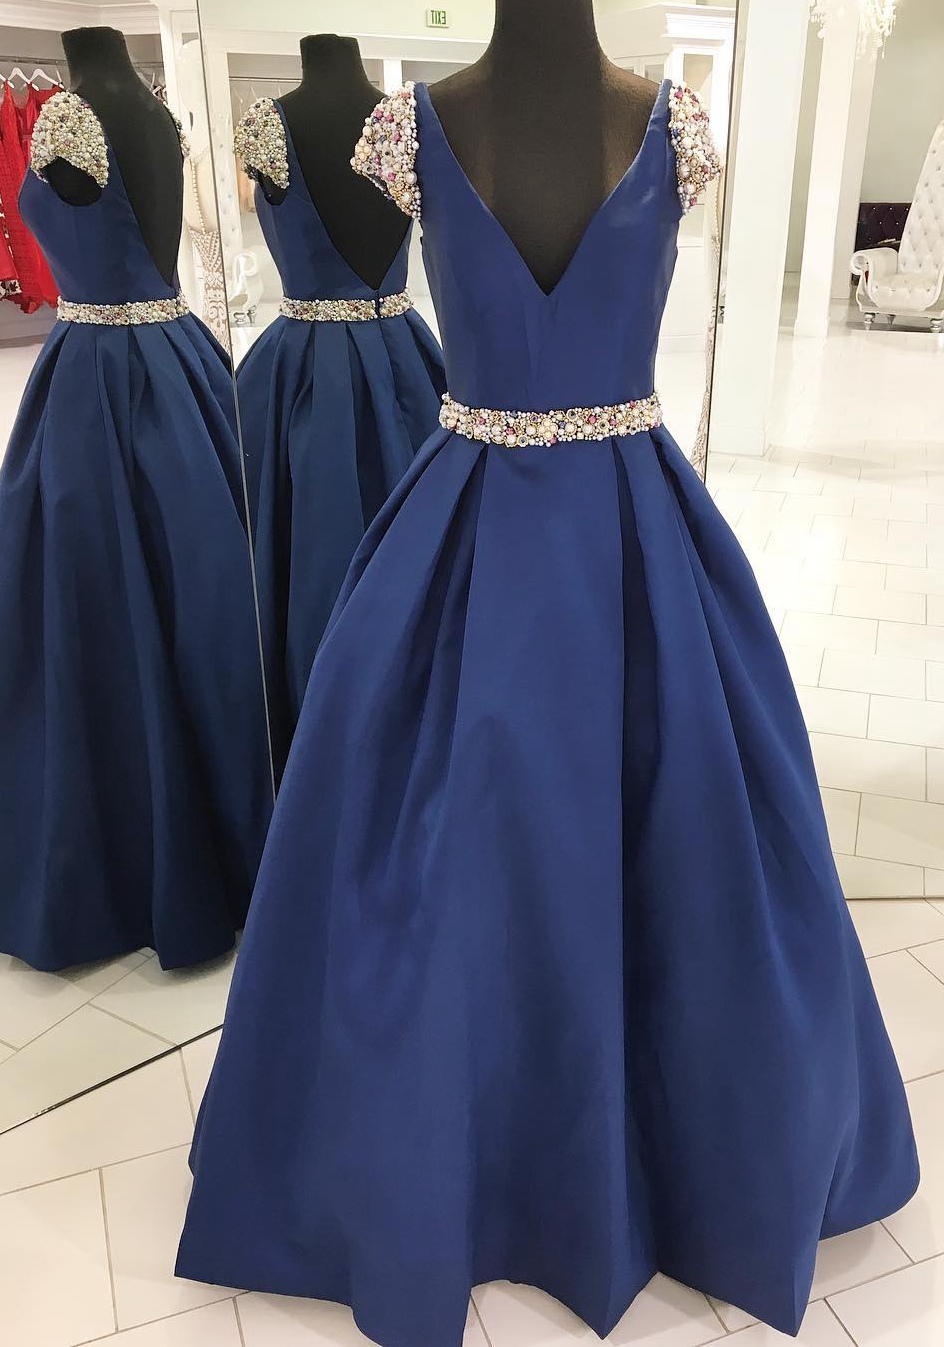 Deep V-neck Beaded Ball Gown Prom Dress With Caped Sleeve , Sweet 16 Prom Dress, Sexy Ball Gown Quinceanera Dress, A Line Women Pageant Gowns